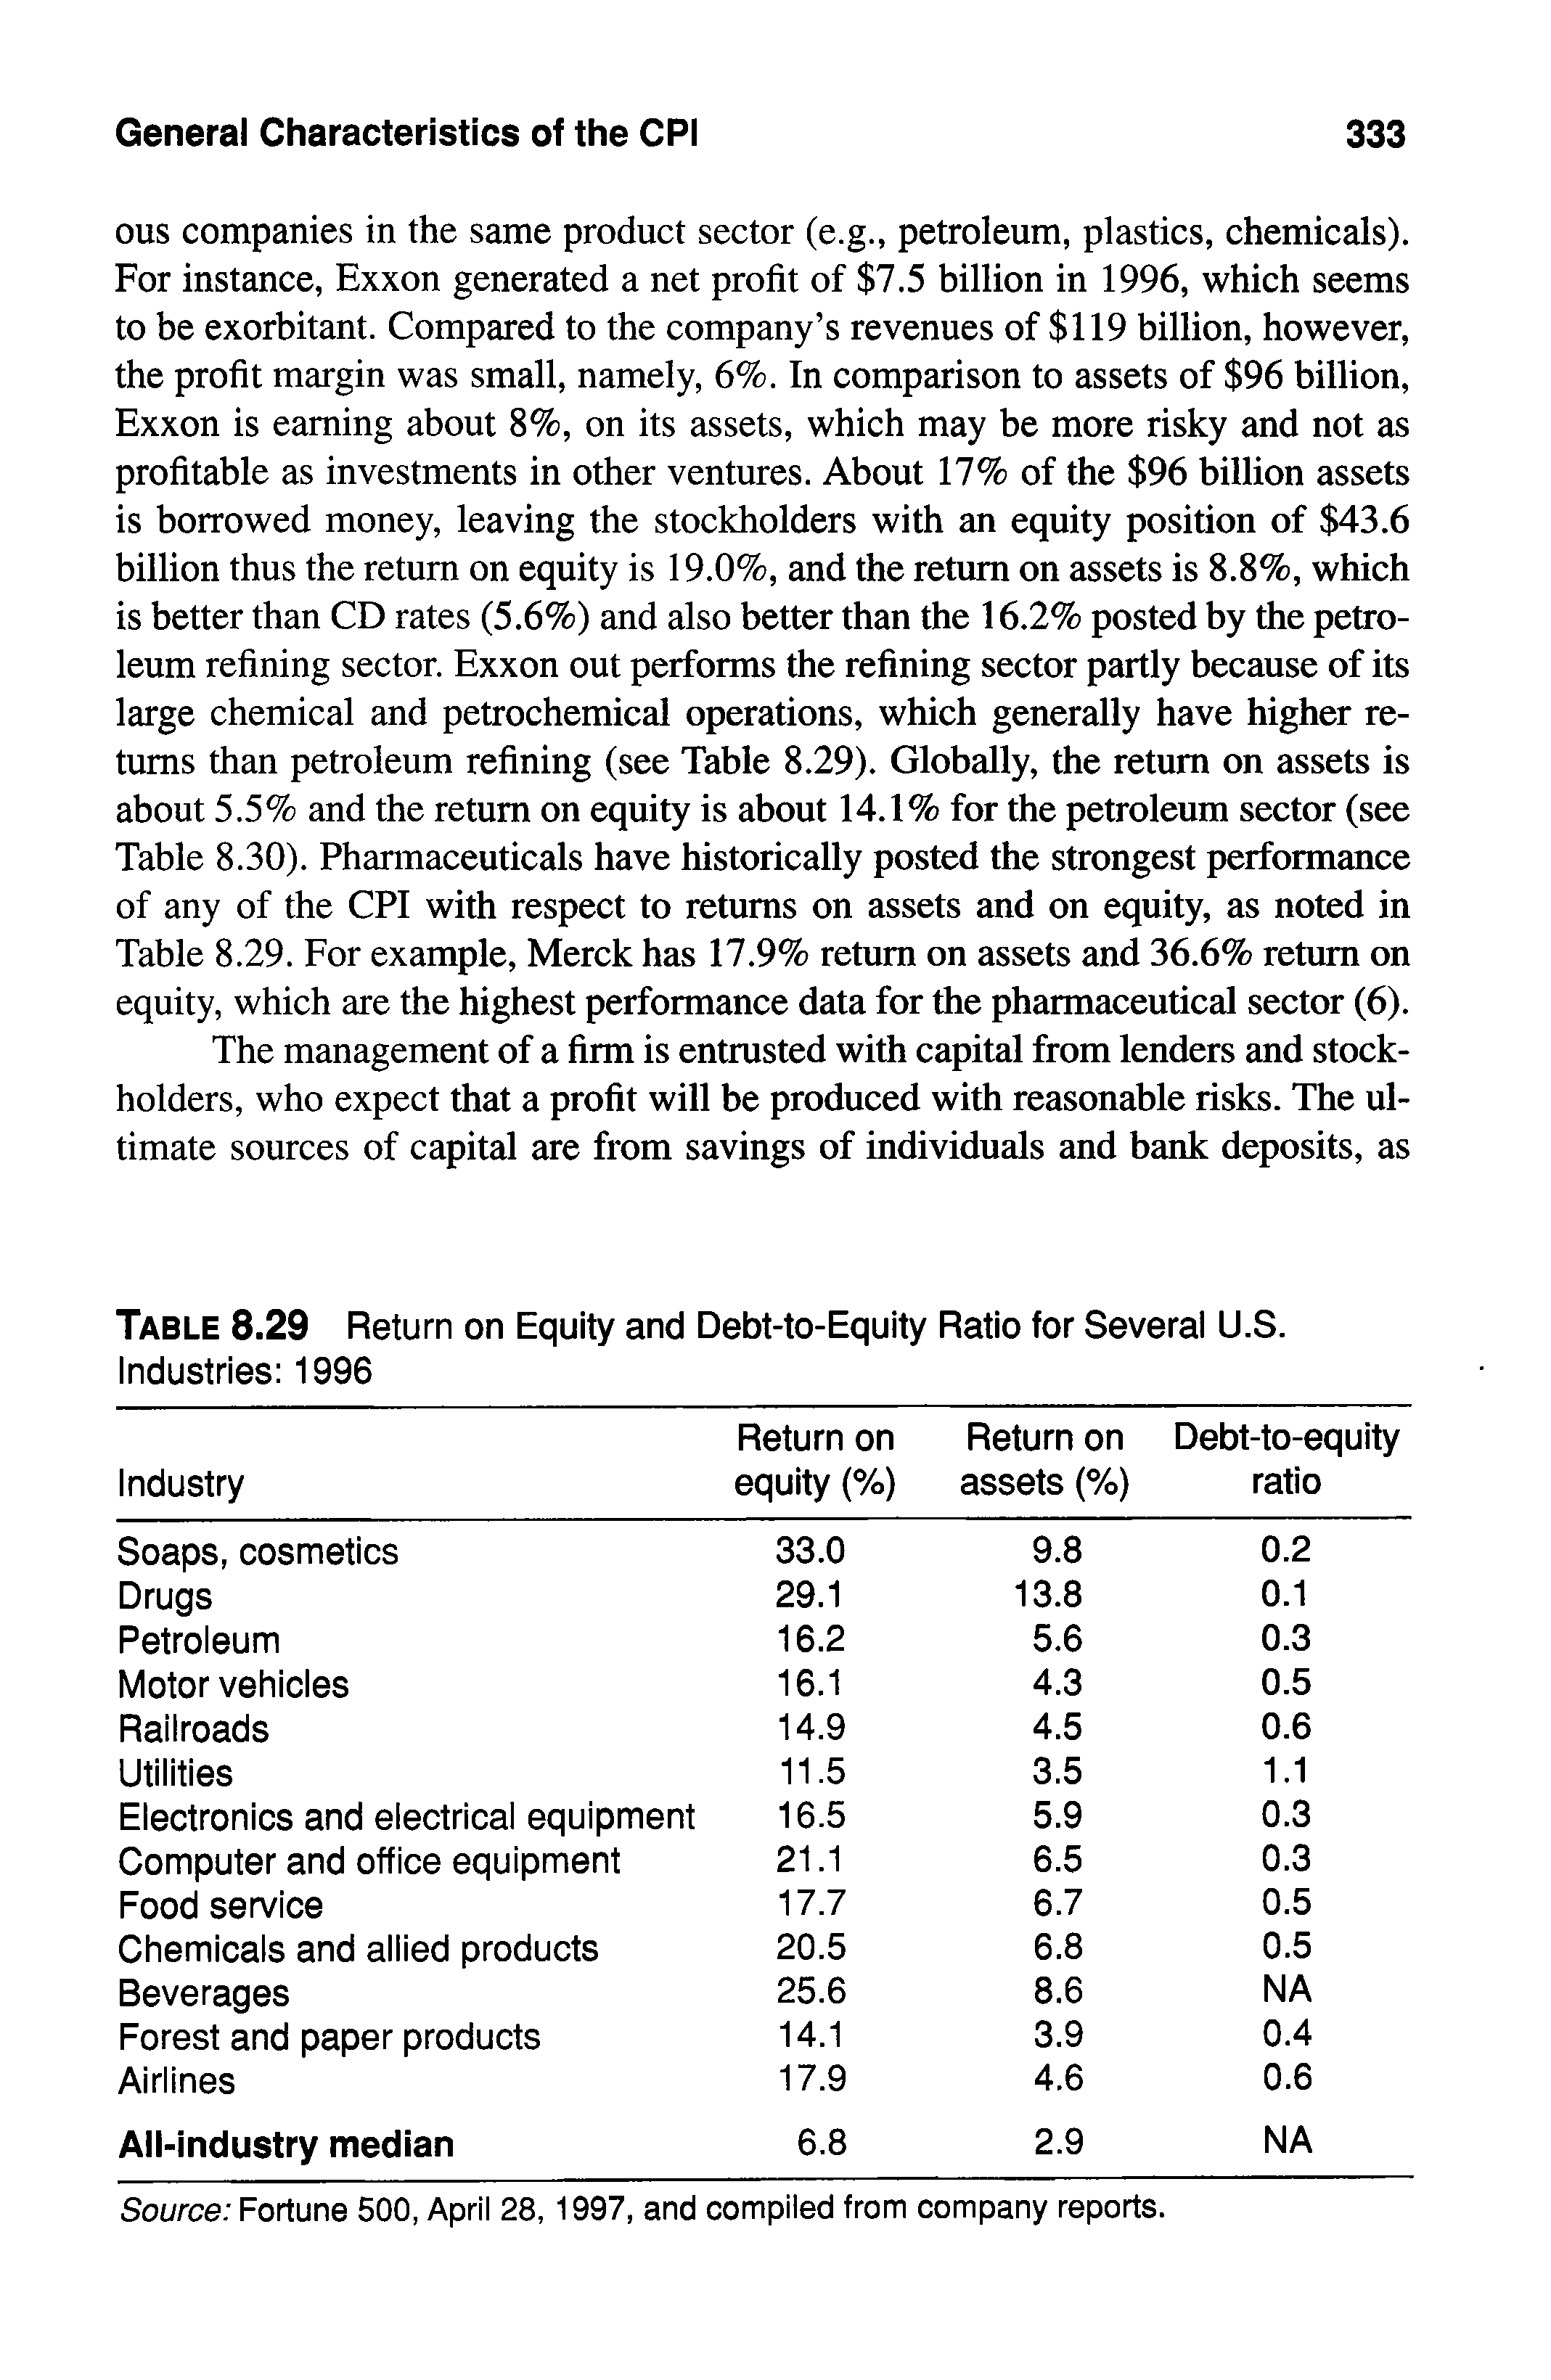 Table 8.29 Return on Equity and Debt-to-Equity Ratio for Several U.S. Industries 1996...